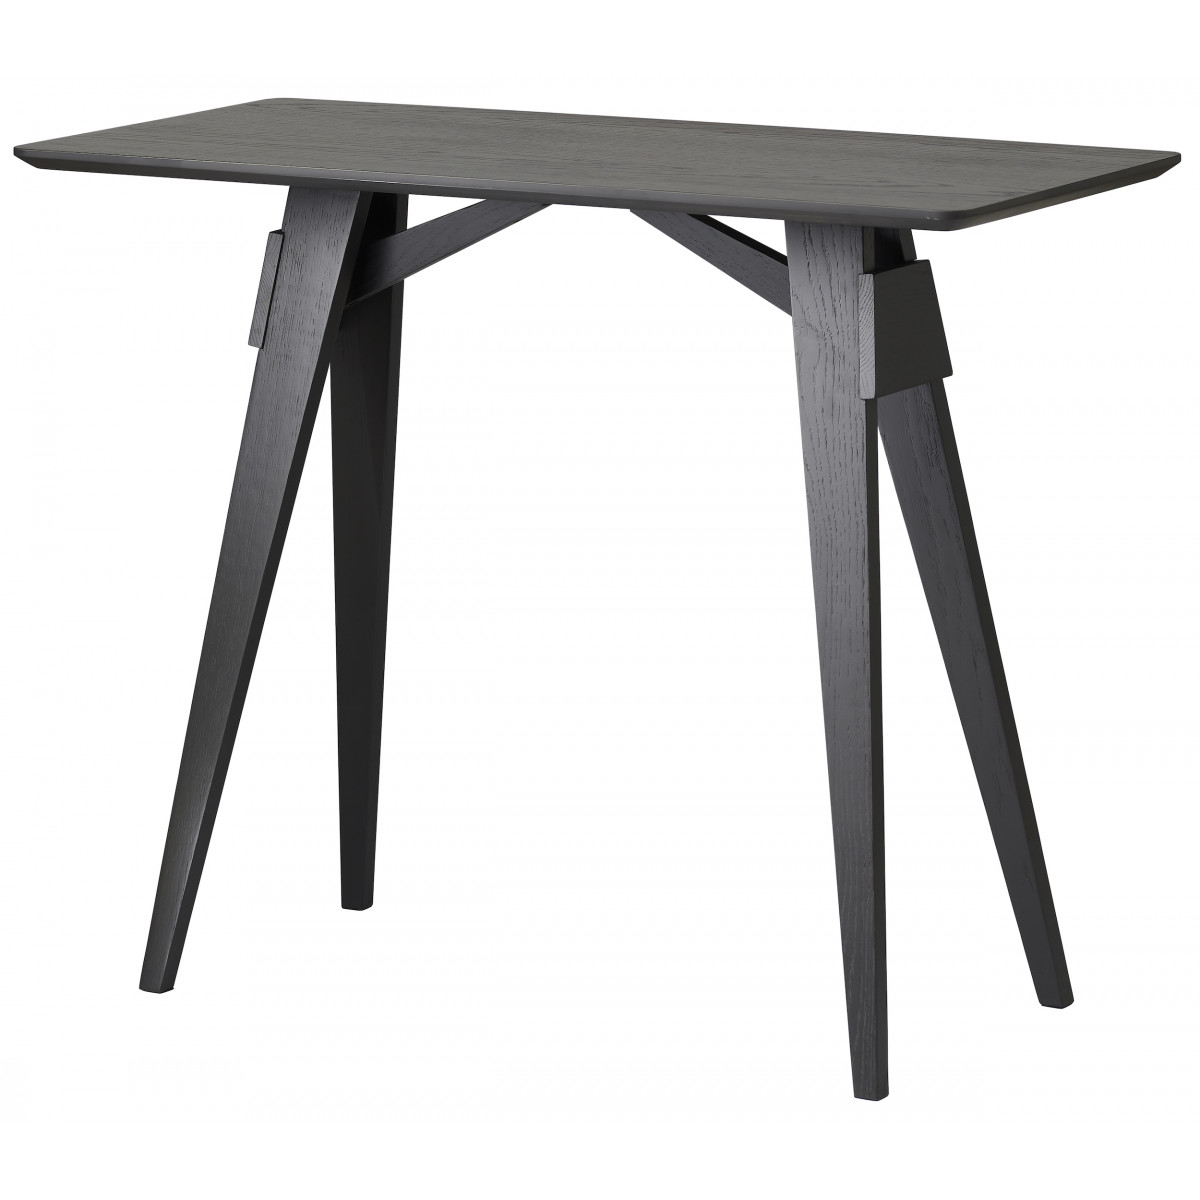 Arco small desk - Stained black